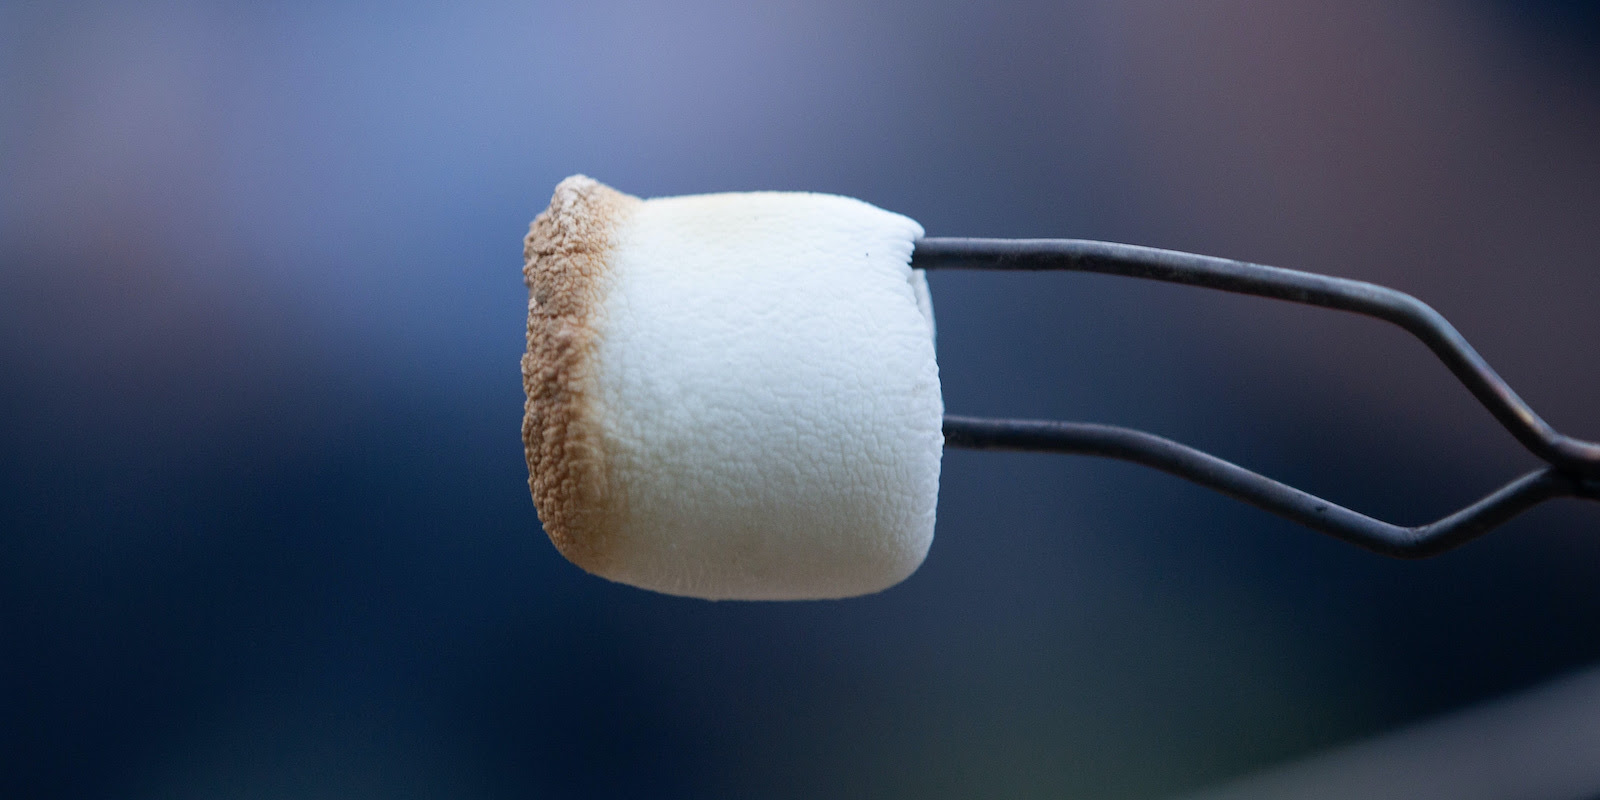 A photograph of a metal prong with a lightly-toasted marshmallow on the end, against a blue background.